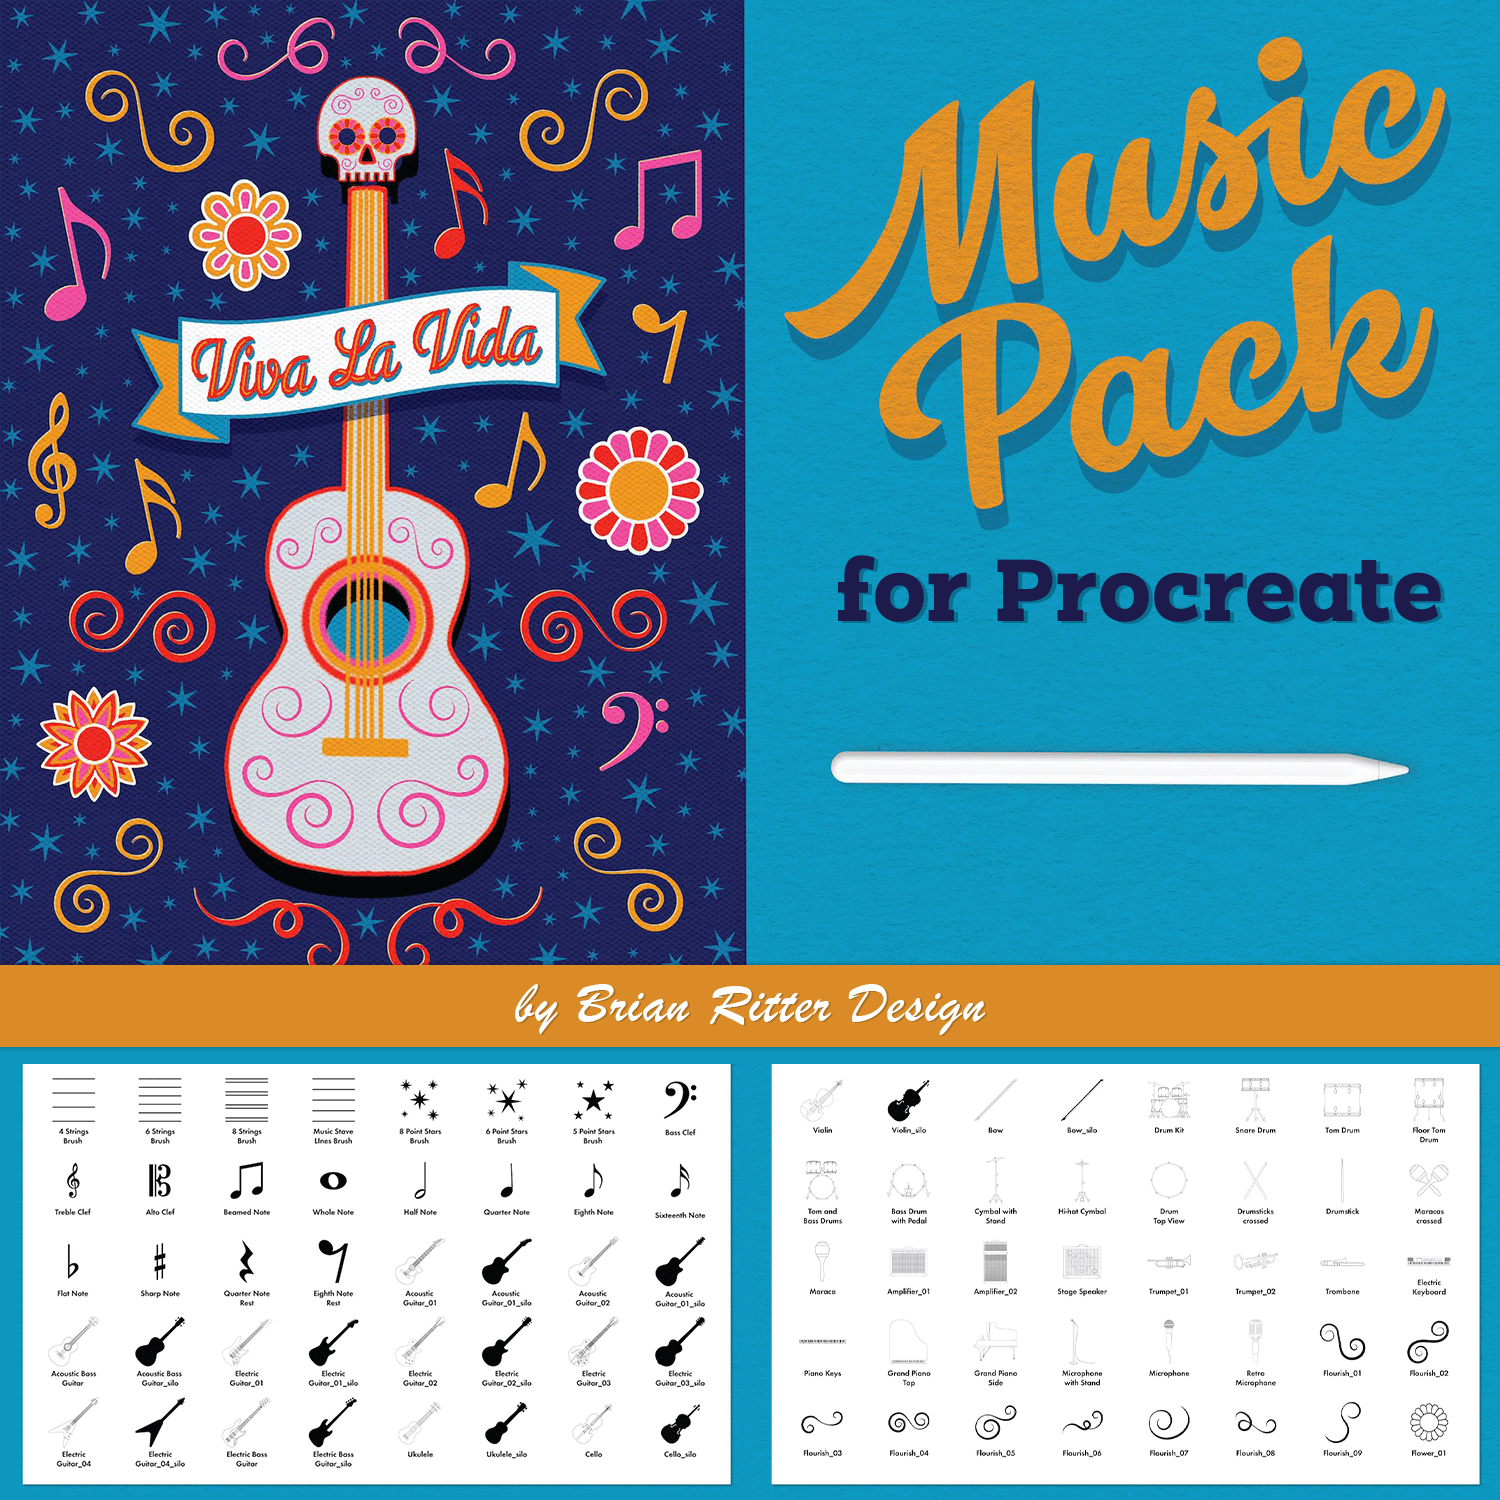 Music Pack for Procreate cover.